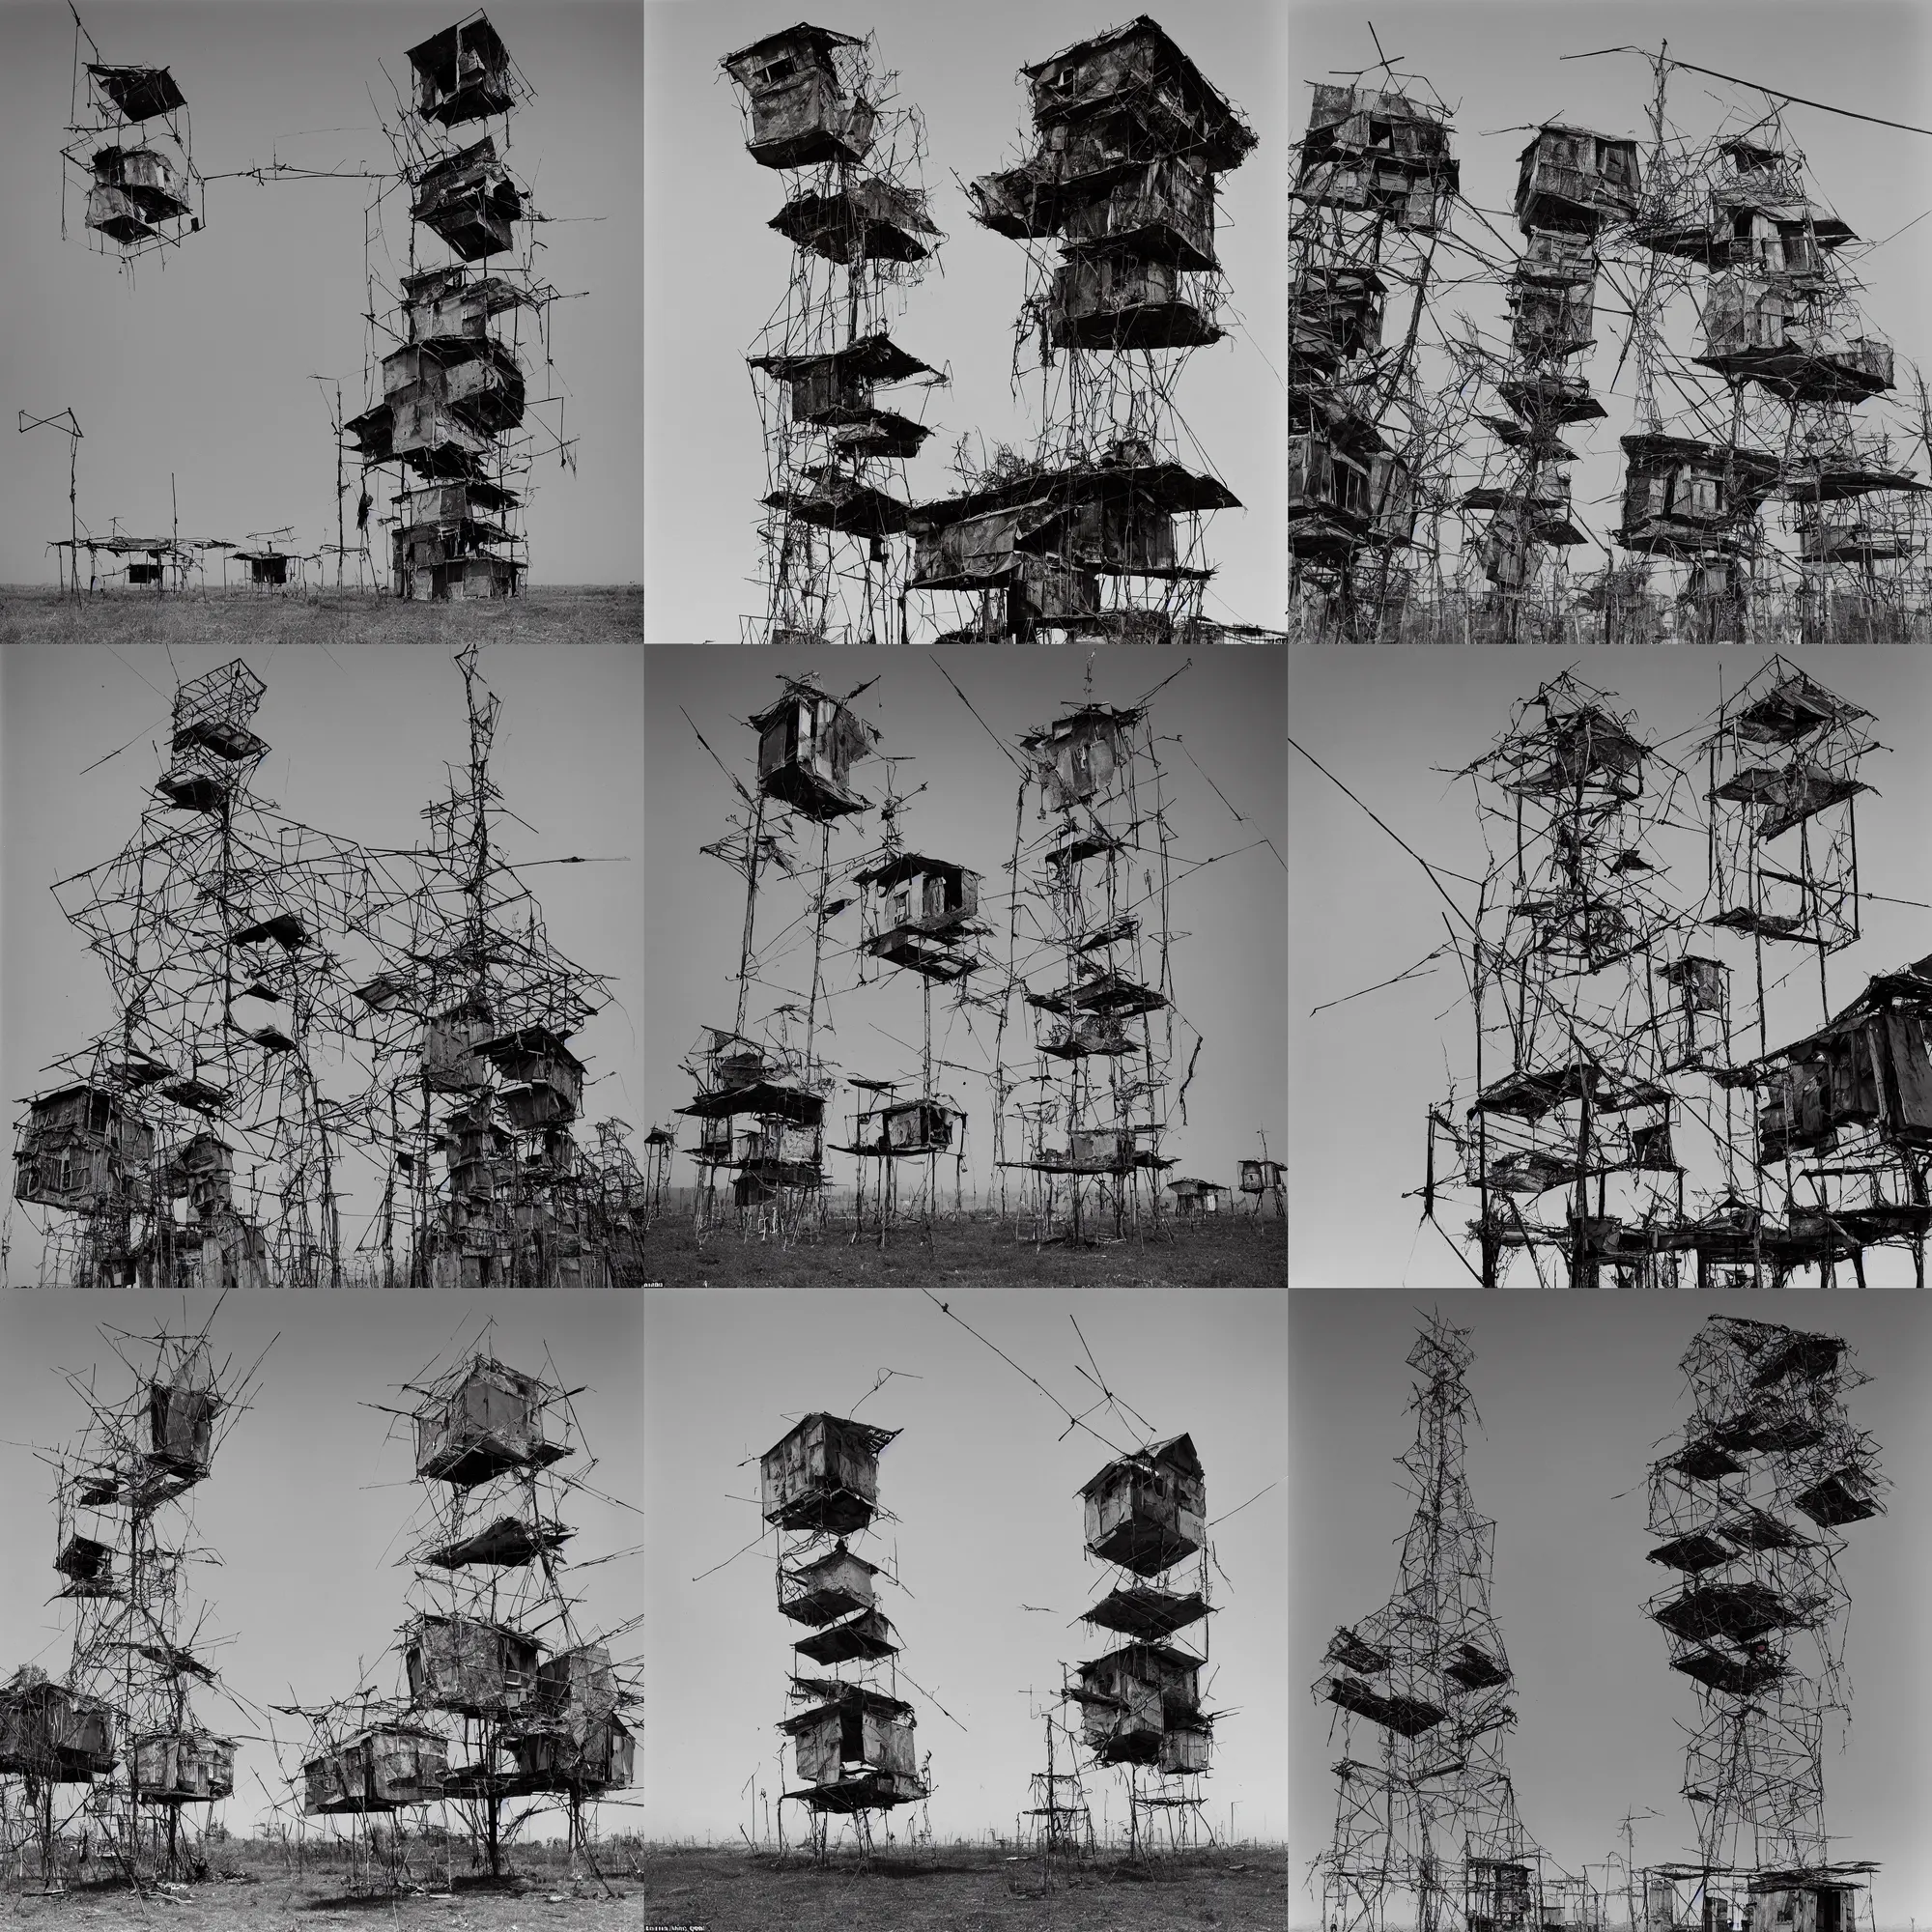 Prompt: a suspended tower made up of makeshift squatter shacks with rusted metal facades, covered by antennas, mamiya, f 1 1, fully frontal view, uniform plain sky, photographed by salvador dali